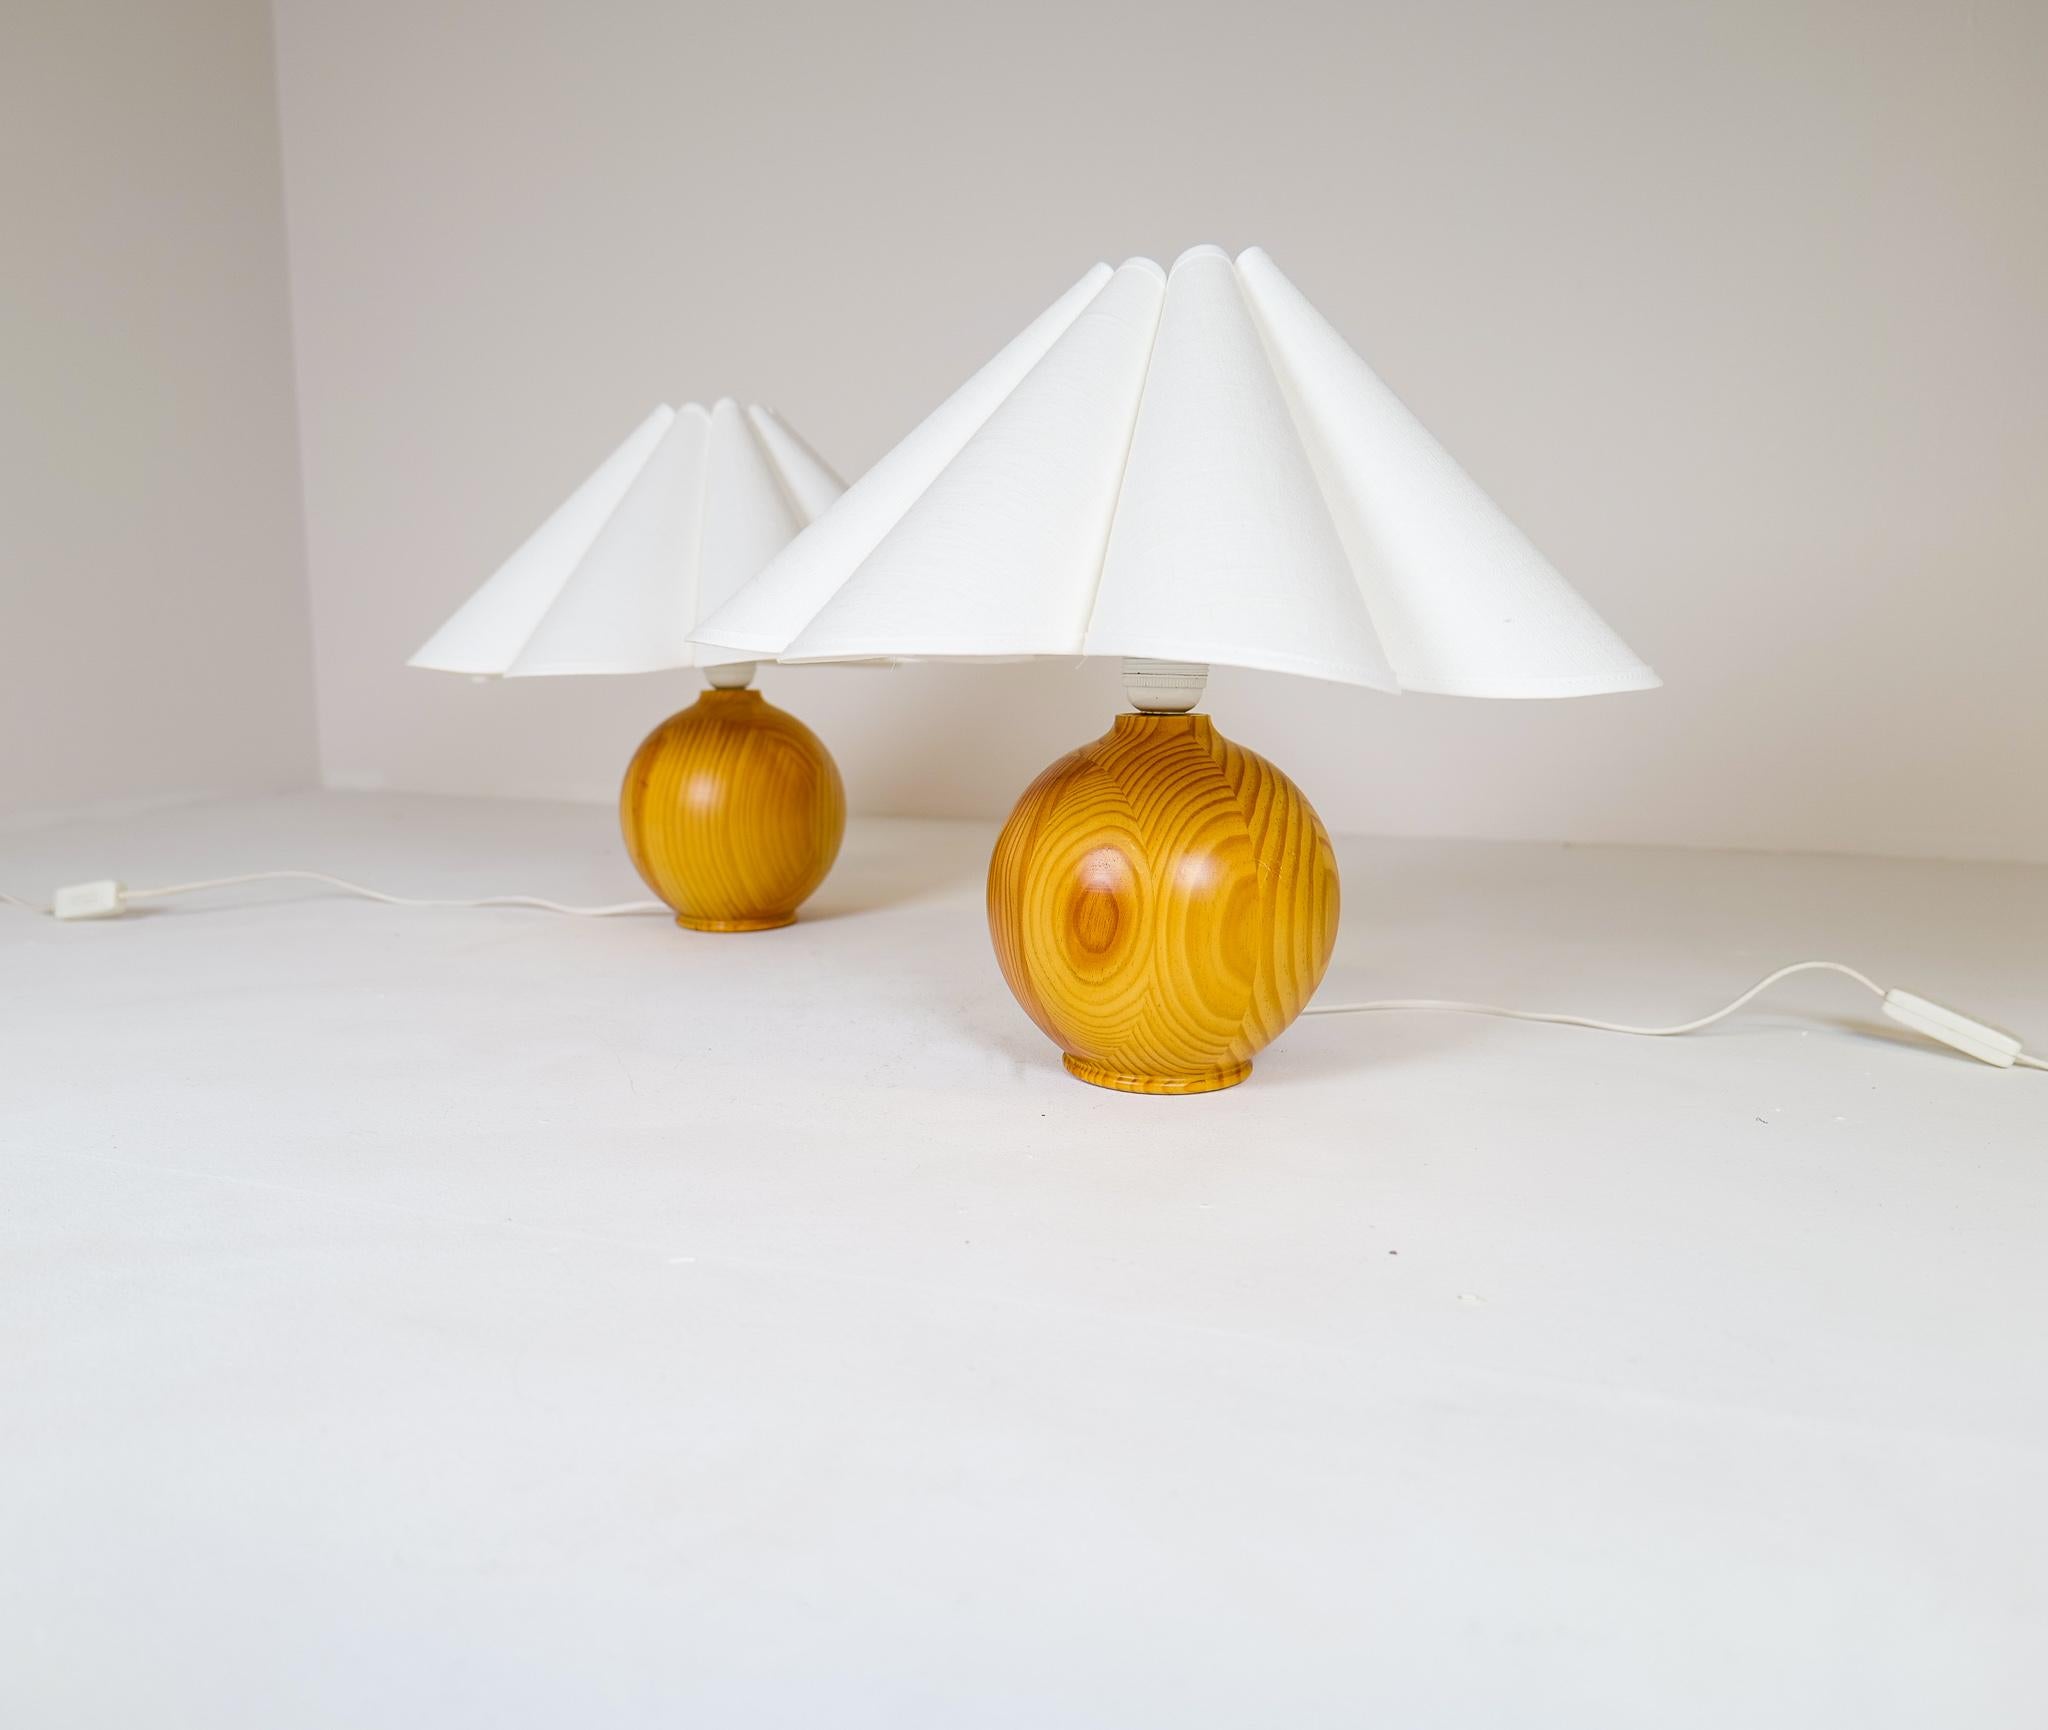 Mid-Century Modern Sculptural Table Lamps in Solid Pine, Sweden, 1970s For Sale 7